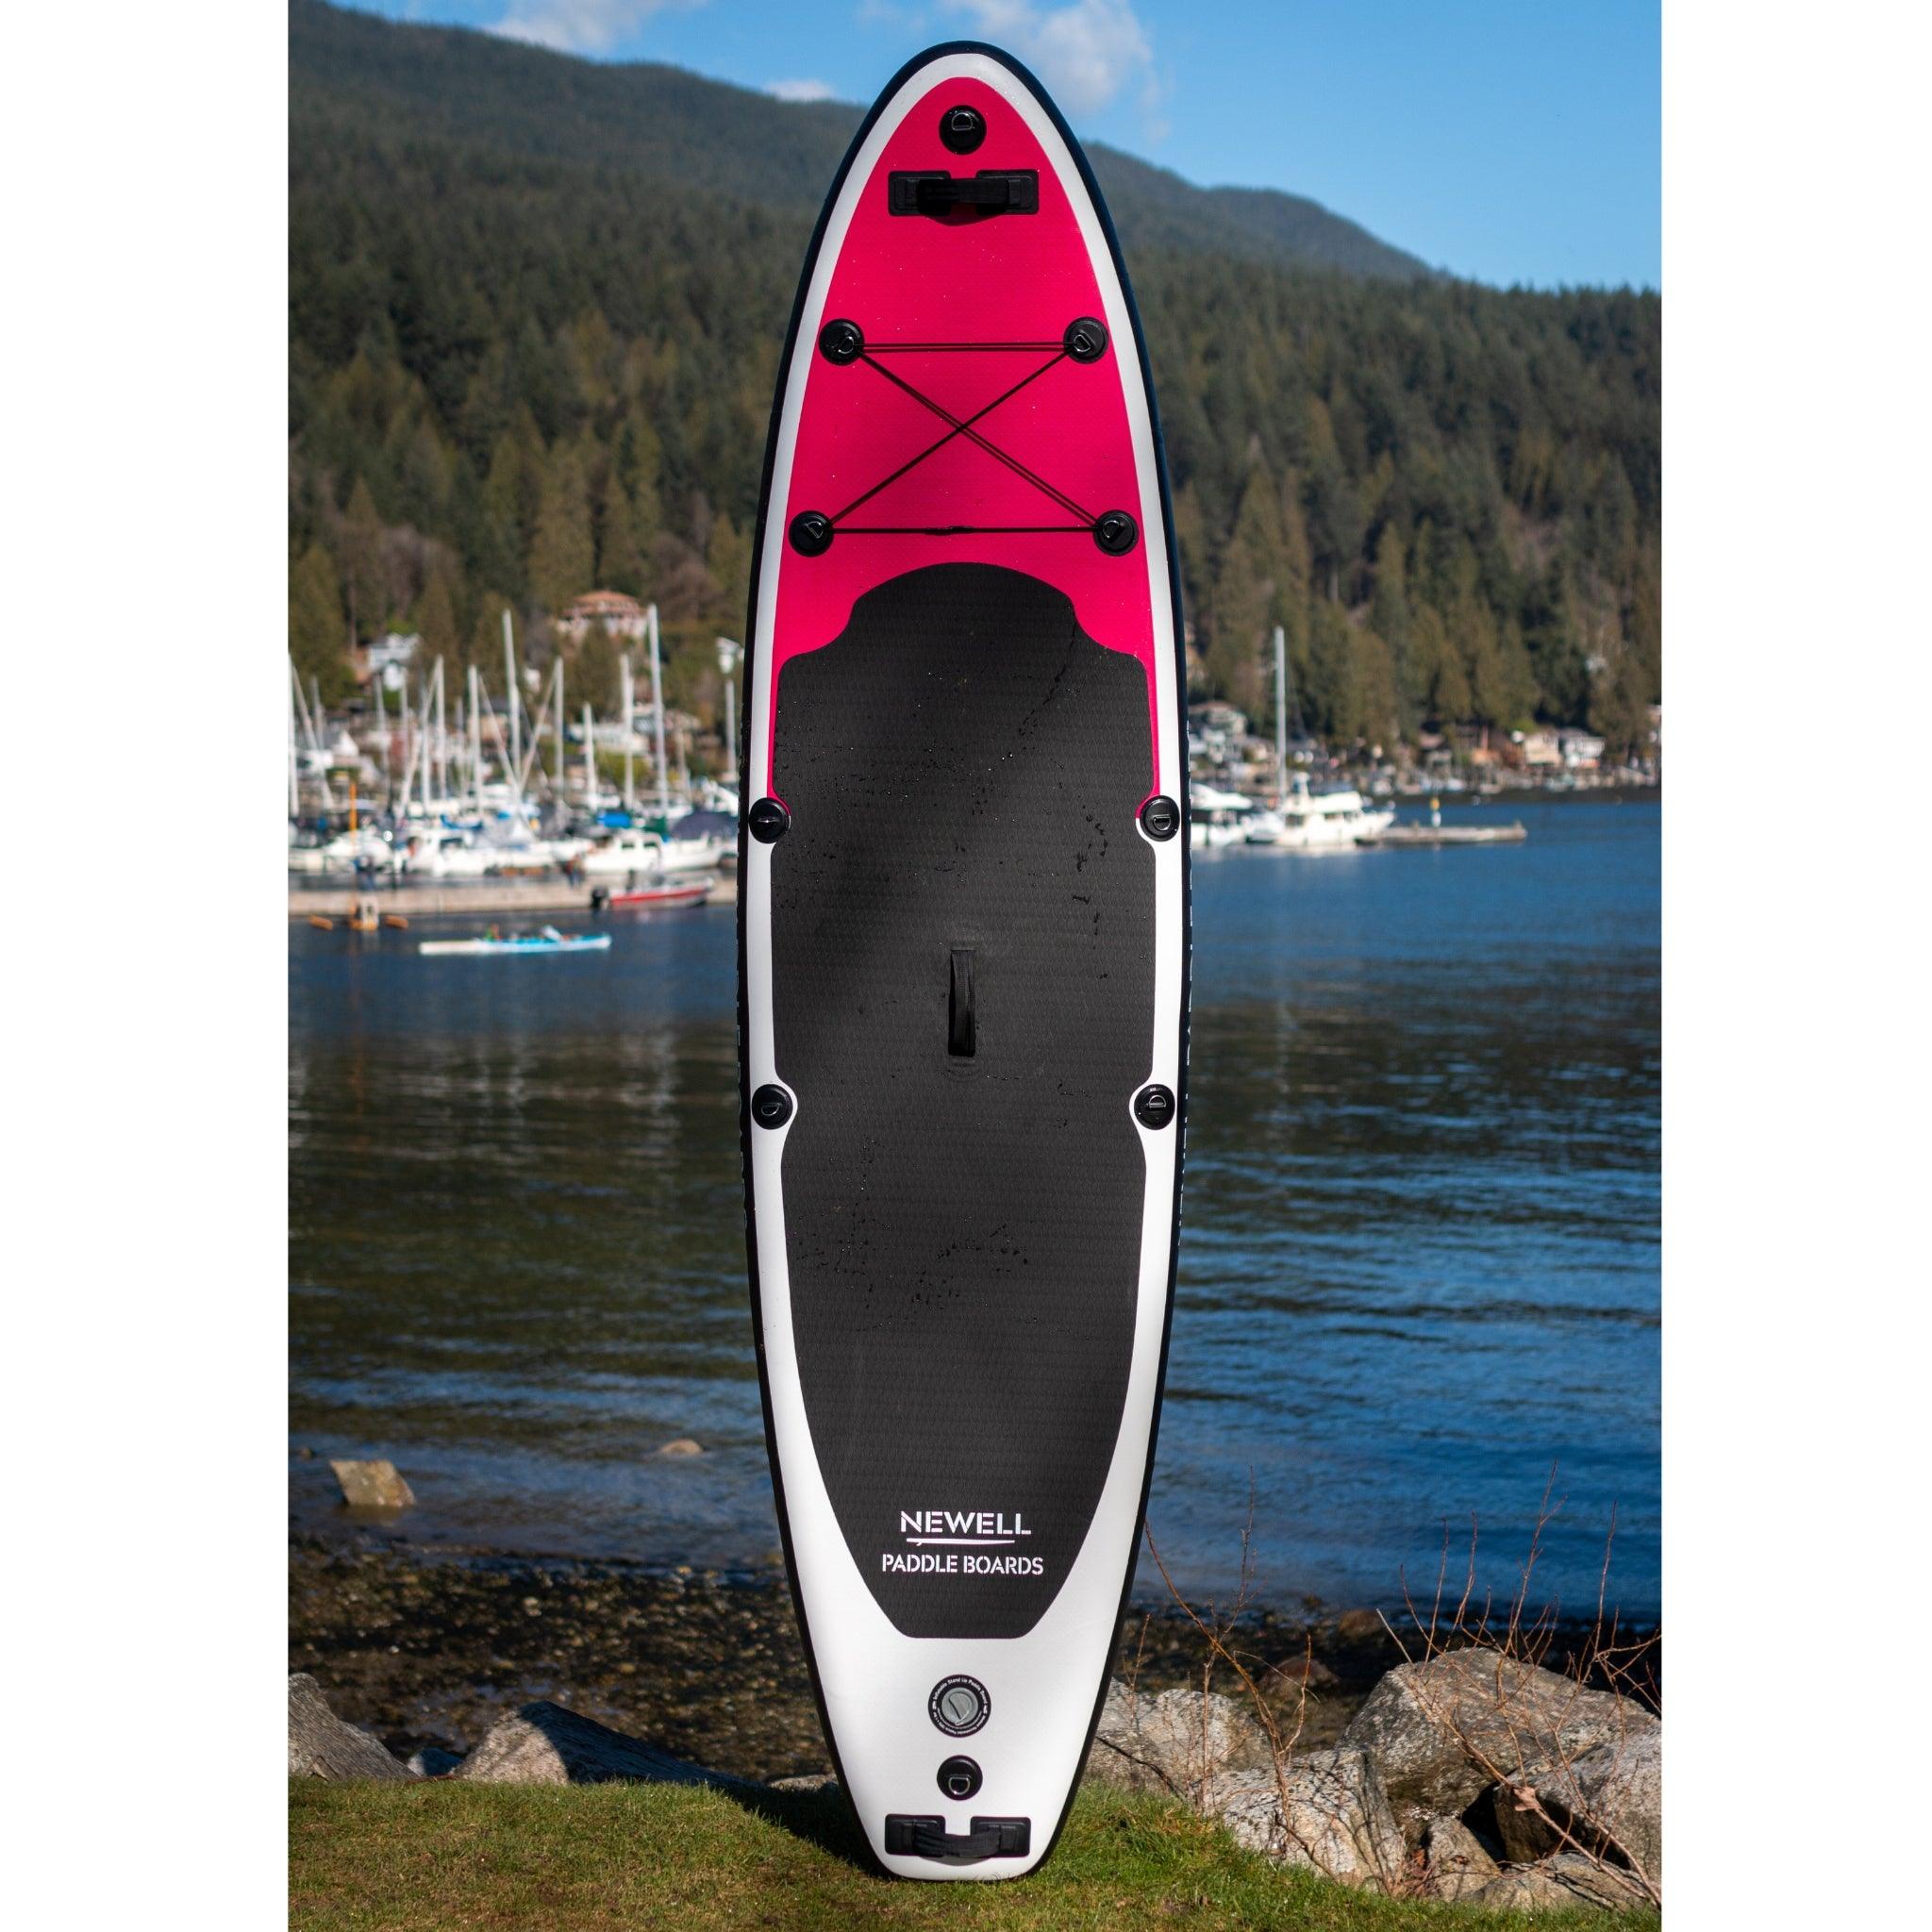 The Pike paddleboard by Newell Outdoors